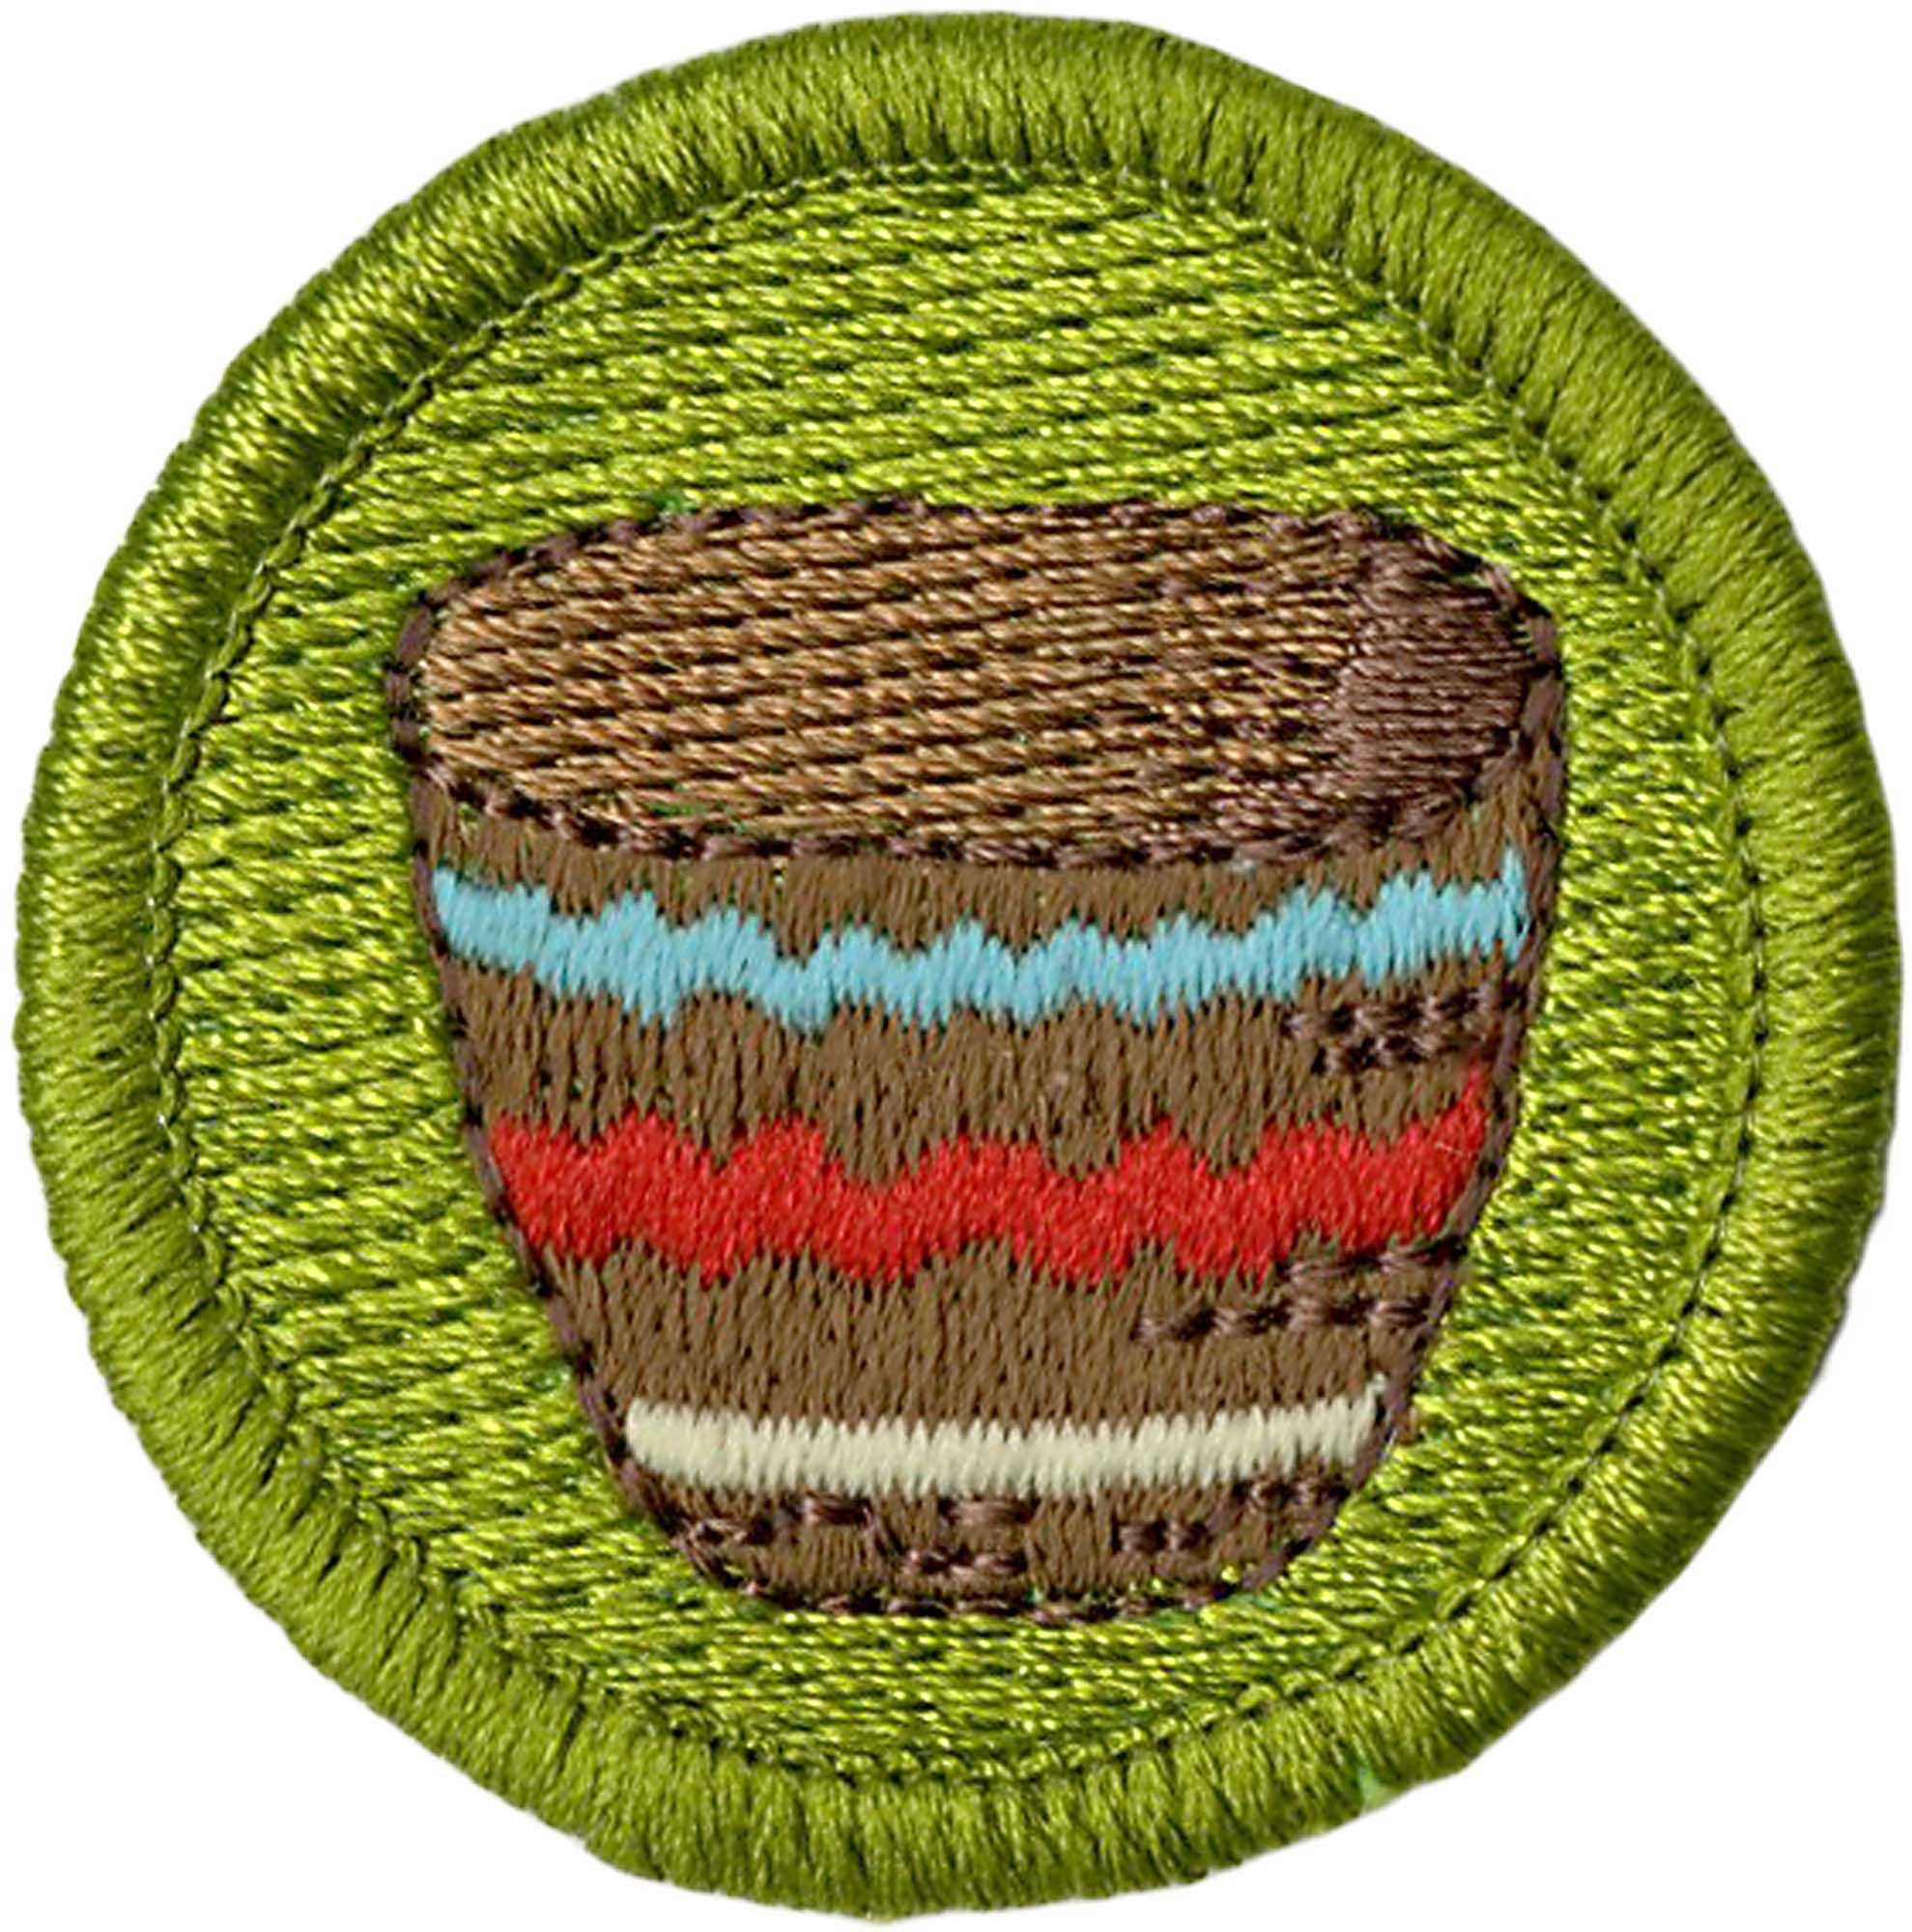 Basketry merit badge plastic backed patch oP 